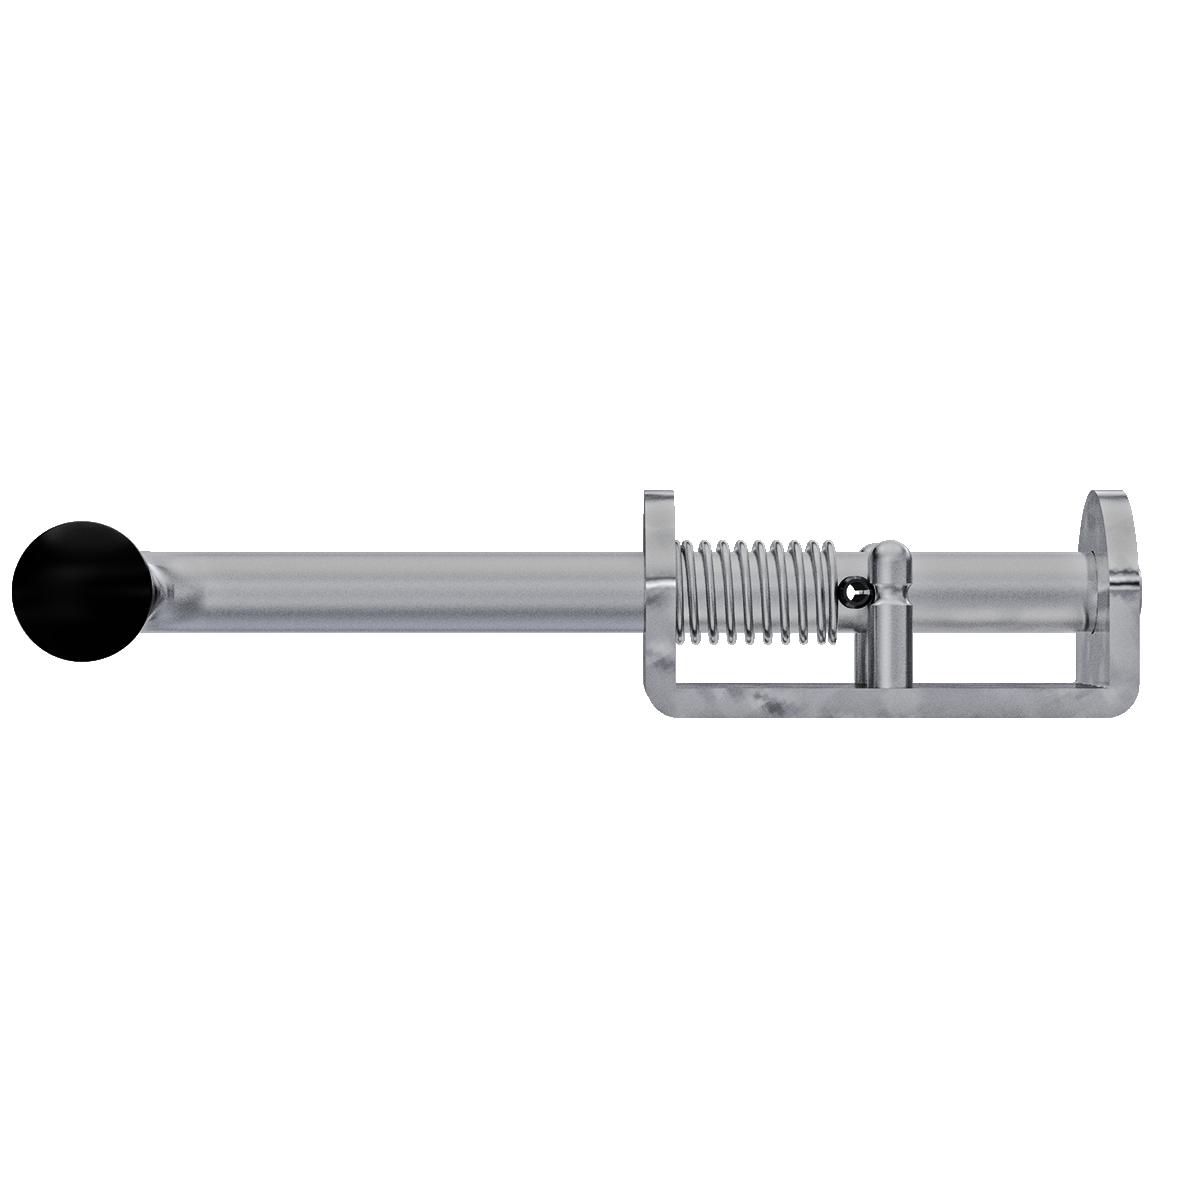 Aluminum base Spring Bolt with stainless steel rod. Shown in front perspective with rod in open position.